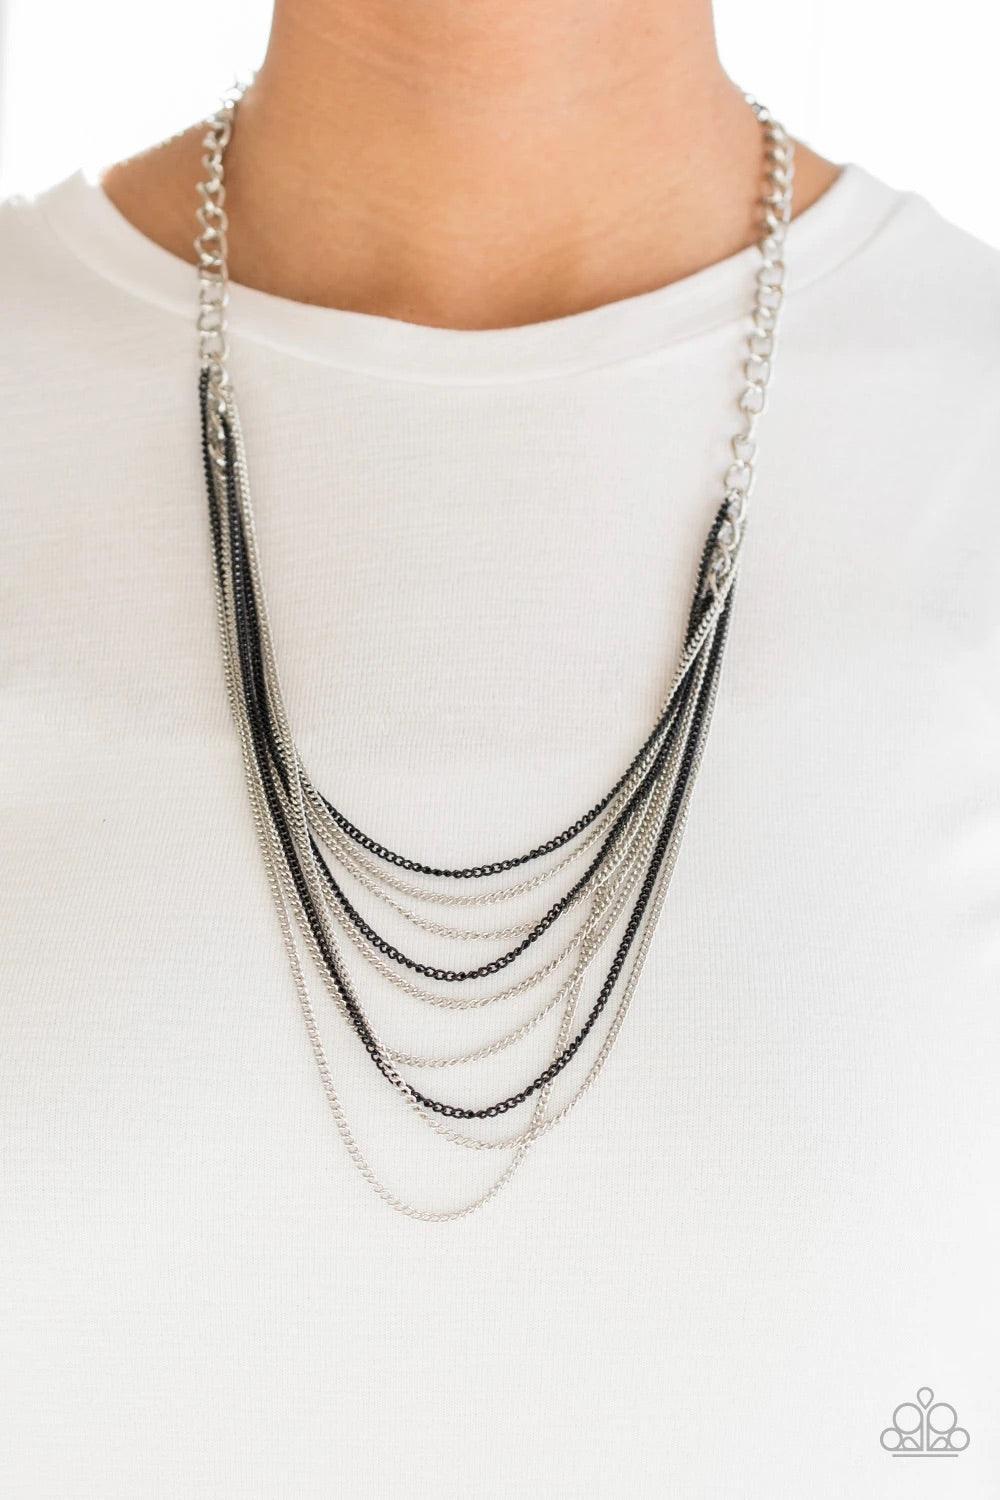 Paparazzi Accessories Rebel Rainbow - Black Strands of bold silver links give way to rows of shimmery silver and shiny black chains, creating colorful layers down the chest. Features an adjustable clasp closure. Sold as one individual necklace. Includes o